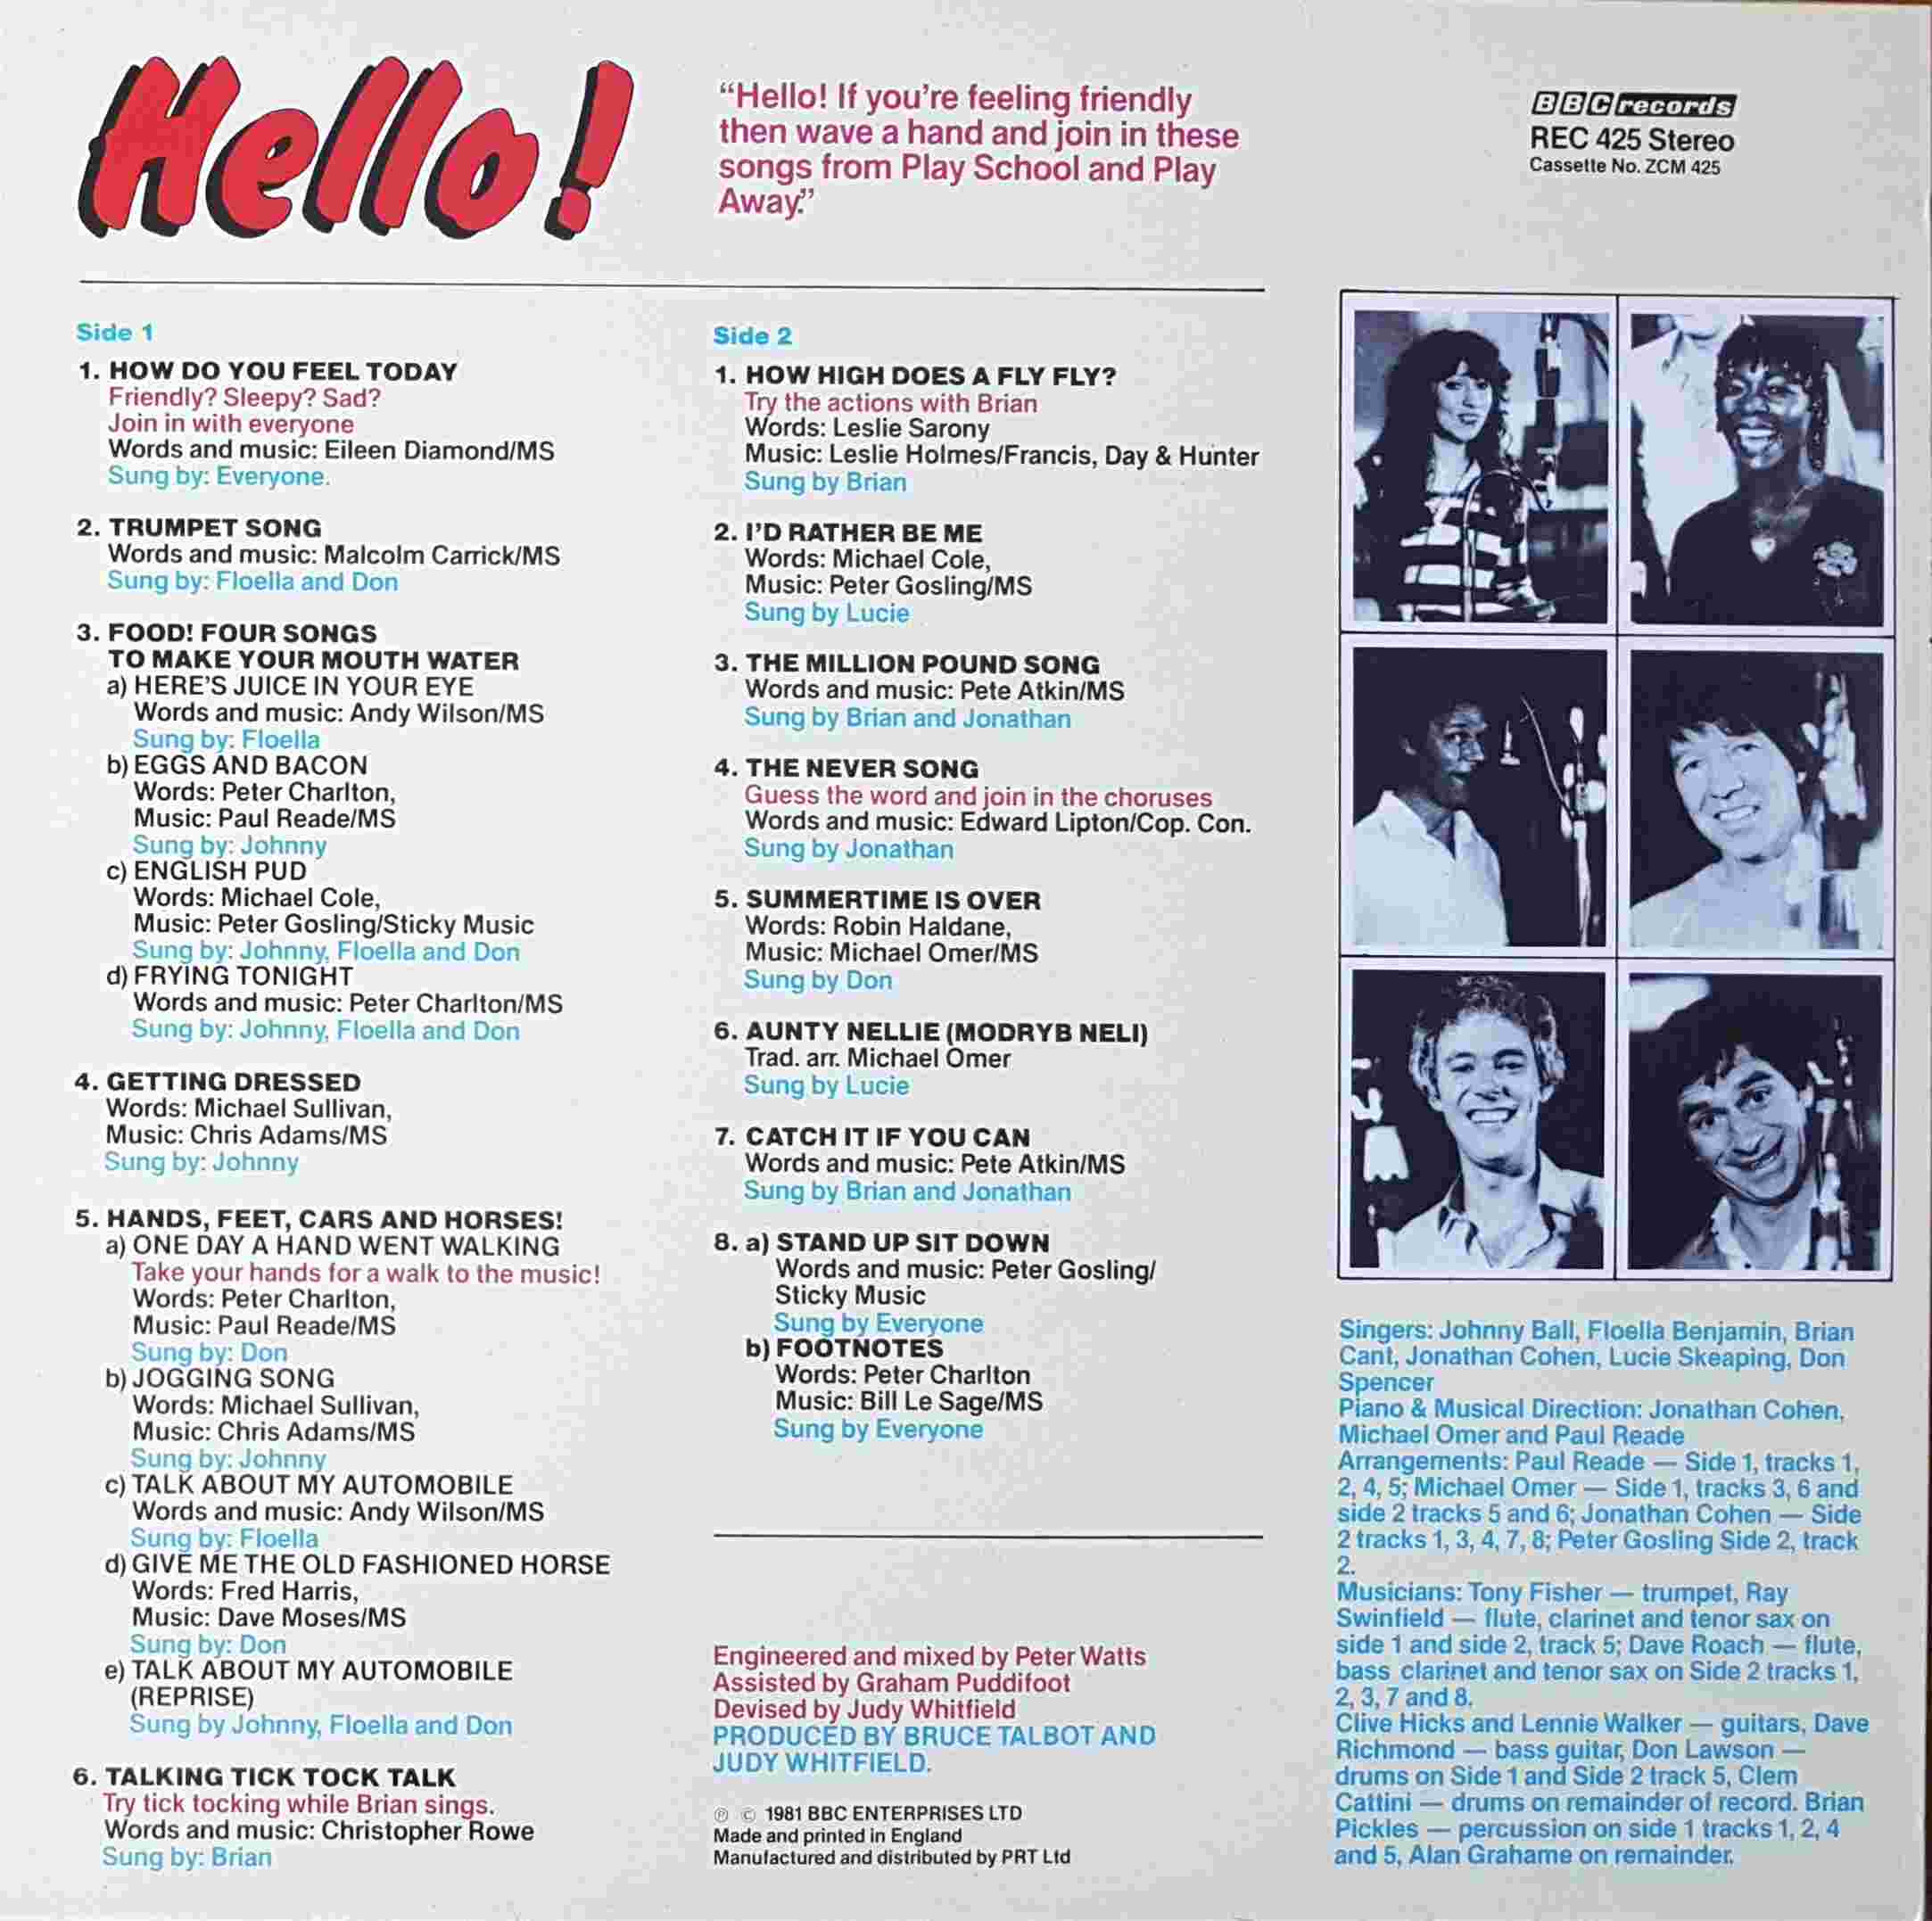 Picture of REC 425 Play school - Hello by artist Various from the BBC records and Tapes library